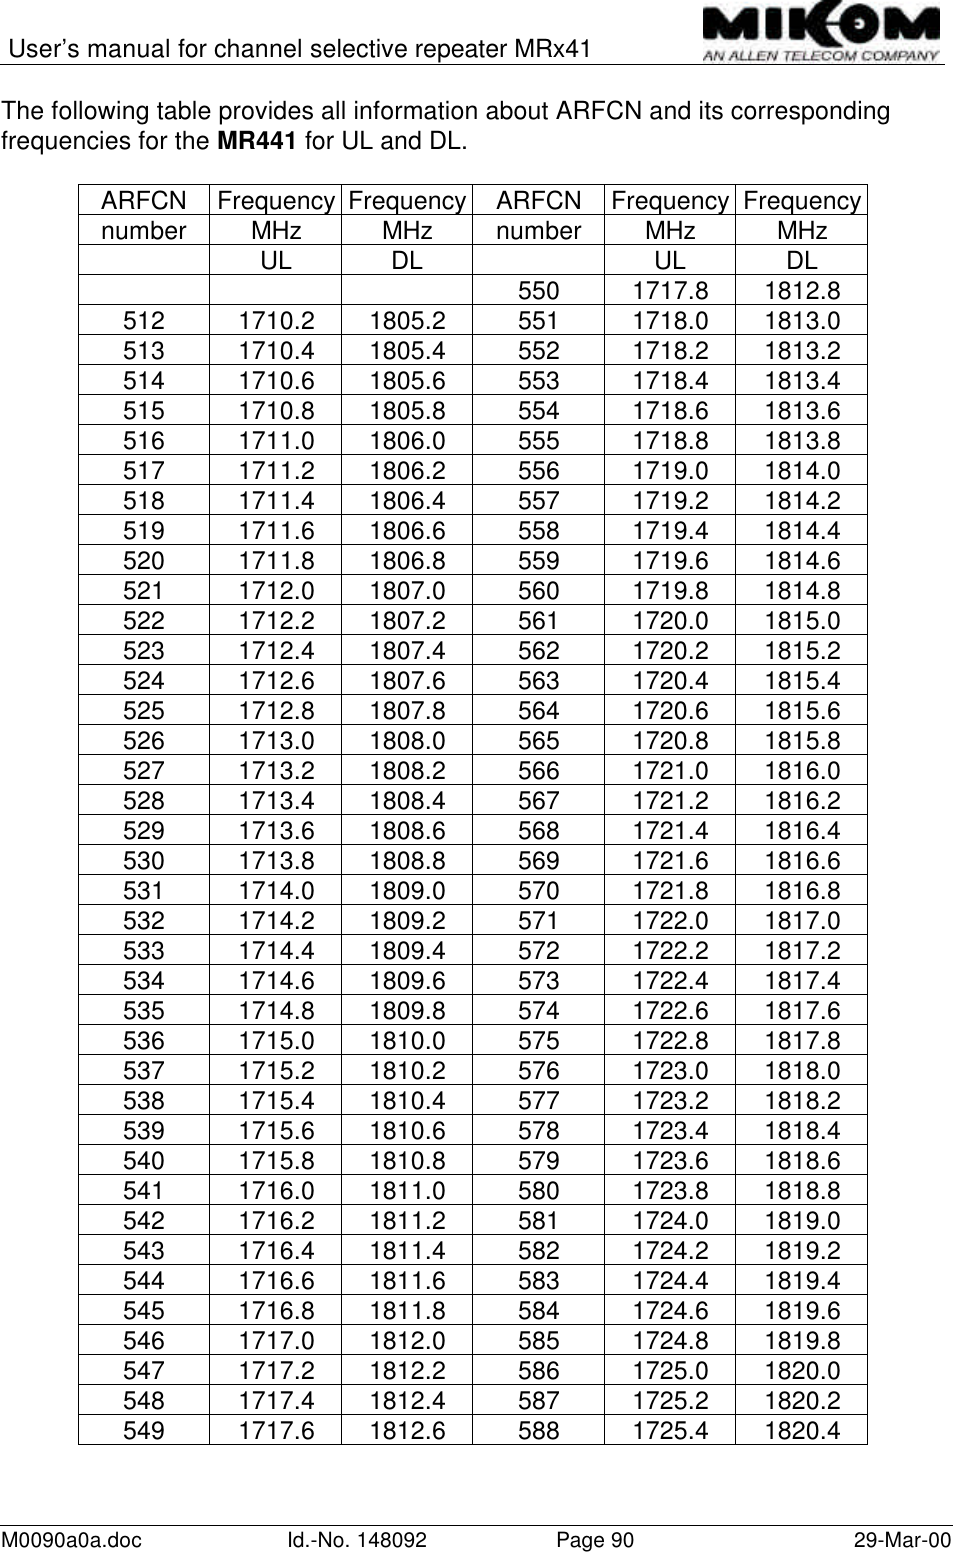 User’s manual for channel selective repeater MRx41M0090a0a.doc Id.-No. 148092 Page 90 29-Mar-00The following table provides all information about ARFCN and its correspondingfrequencies for the MR441 for UL and DL.ARFCN Frequency Frequency ARFCN Frequency Frequencynumber MHz MHz number MHz MHzUL DL UL DL550 1717.8 1812.8512 1710.2 1805.2 551 1718.0 1813.0513 1710.4 1805.4 552 1718.2 1813.2514 1710.6 1805.6 553 1718.4 1813.4515 1710.8 1805.8 554 1718.6 1813.6516 1711.0 1806.0 555 1718.8 1813.8517 1711.2 1806.2 556 1719.0 1814.0518 1711.4 1806.4 557 1719.2 1814.2519 1711.6 1806.6 558 1719.4 1814.4520 1711.8 1806.8 559 1719.6 1814.6521 1712.0 1807.0 560 1719.8 1814.8522 1712.2 1807.2 561 1720.0 1815.0523 1712.4 1807.4 562 1720.2 1815.2524 1712.6 1807.6 563 1720.4 1815.4525 1712.8 1807.8 564 1720.6 1815.6526 1713.0 1808.0 565 1720.8 1815.8527 1713.2 1808.2 566 1721.0 1816.0528 1713.4 1808.4 567 1721.2 1816.2529 1713.6 1808.6 568 1721.4 1816.4530 1713.8 1808.8 569 1721.6 1816.6531 1714.0 1809.0 570 1721.8 1816.8532 1714.2 1809.2 571 1722.0 1817.0533 1714.4 1809.4 572 1722.2 1817.2534 1714.6 1809.6 573 1722.4 1817.4535 1714.8 1809.8 574 1722.6 1817.6536 1715.0 1810.0 575 1722.8 1817.8537 1715.2 1810.2 576 1723.0 1818.0538 1715.4 1810.4 577 1723.2 1818.2539 1715.6 1810.6 578 1723.4 1818.4540 1715.8 1810.8 579 1723.6 1818.6541 1716.0 1811.0 580 1723.8 1818.8542 1716.2 1811.2 581 1724.0 1819.0543 1716.4 1811.4 582 1724.2 1819.2544 1716.6 1811.6 583 1724.4 1819.4545 1716.8 1811.8 584 1724.6 1819.6546 1717.0 1812.0 585 1724.8 1819.8547 1717.2 1812.2 586 1725.0 1820.0548 1717.4 1812.4 587 1725.2 1820.2549 1717.6 1812.6 588 1725.4 1820.4